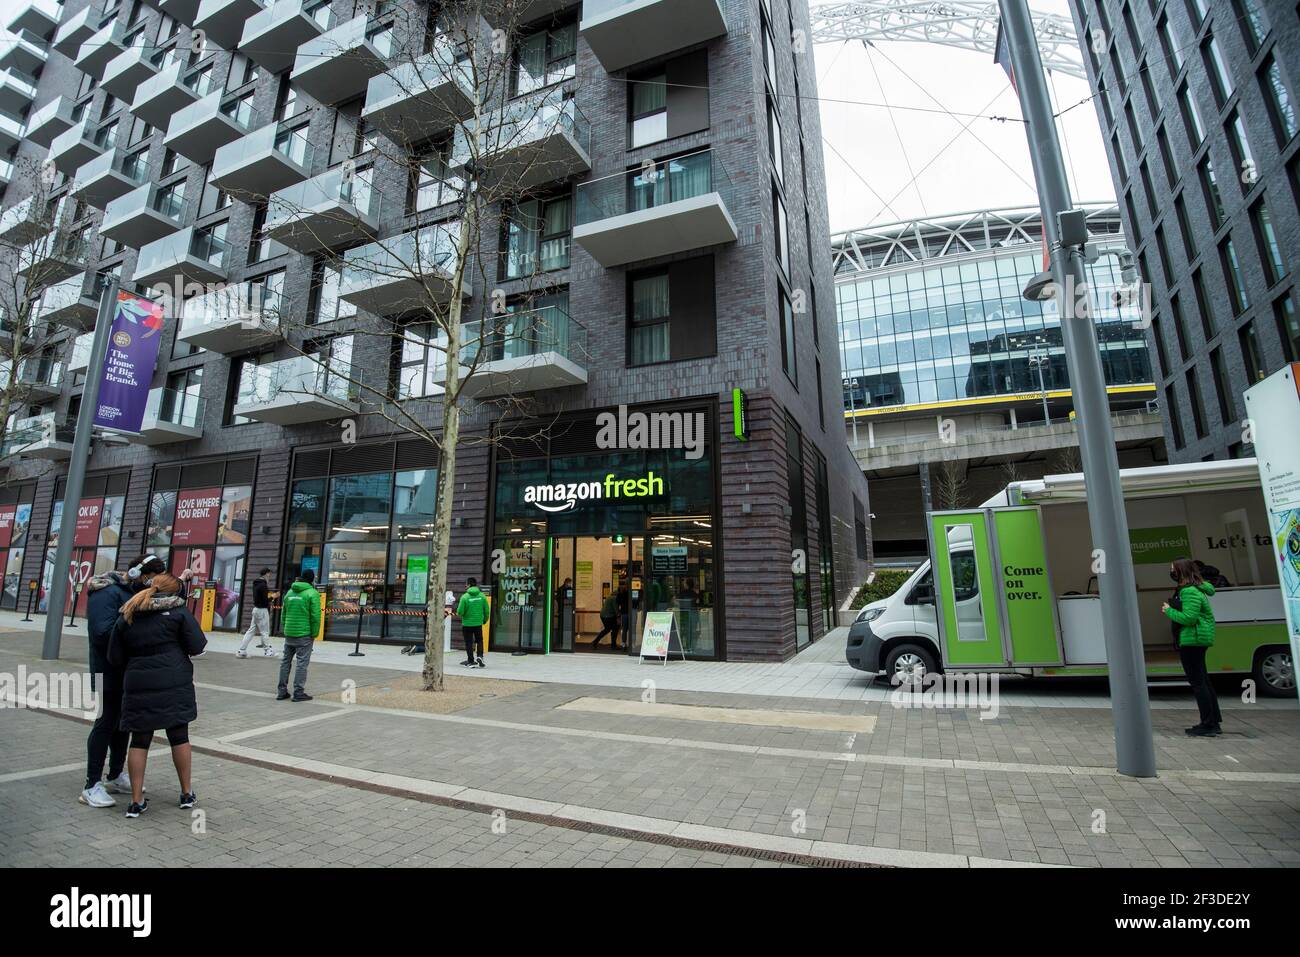 London, UK. 16 March 2021. Outside the new 2,500 sq ft Amazon Fresh store  in Wembley Park, west London on its opening day. It is the second “just  walk out” grocery store